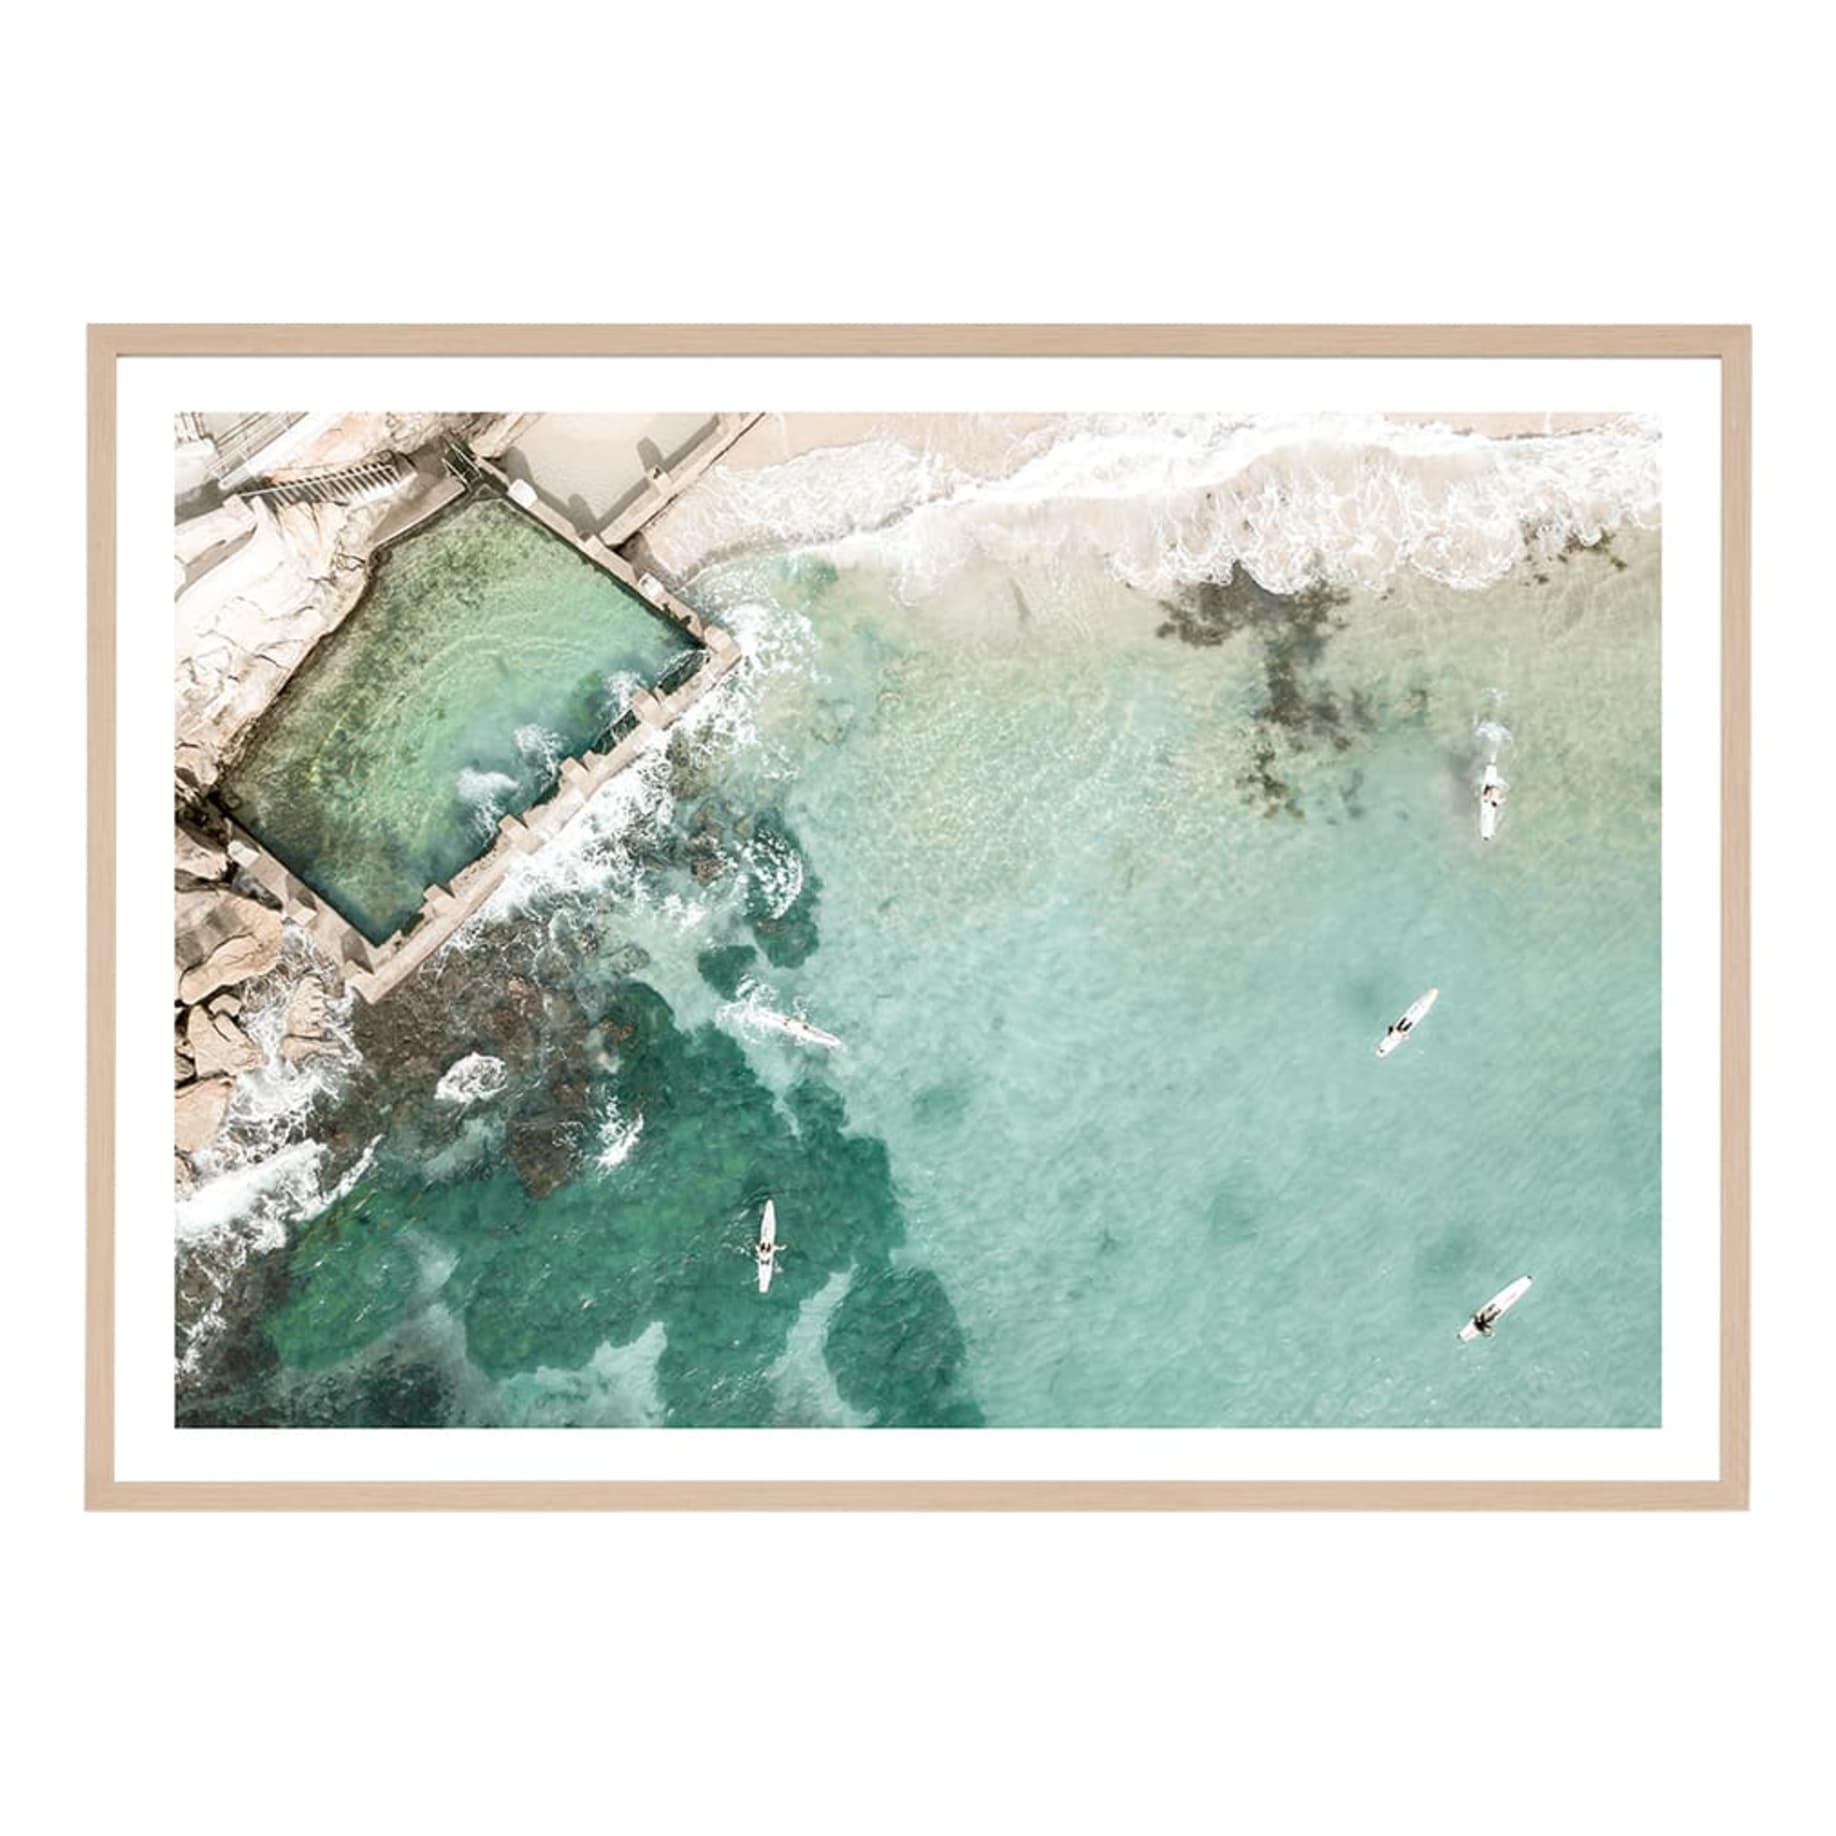 Coogee Paddle Framed Print in 87 x 62cm